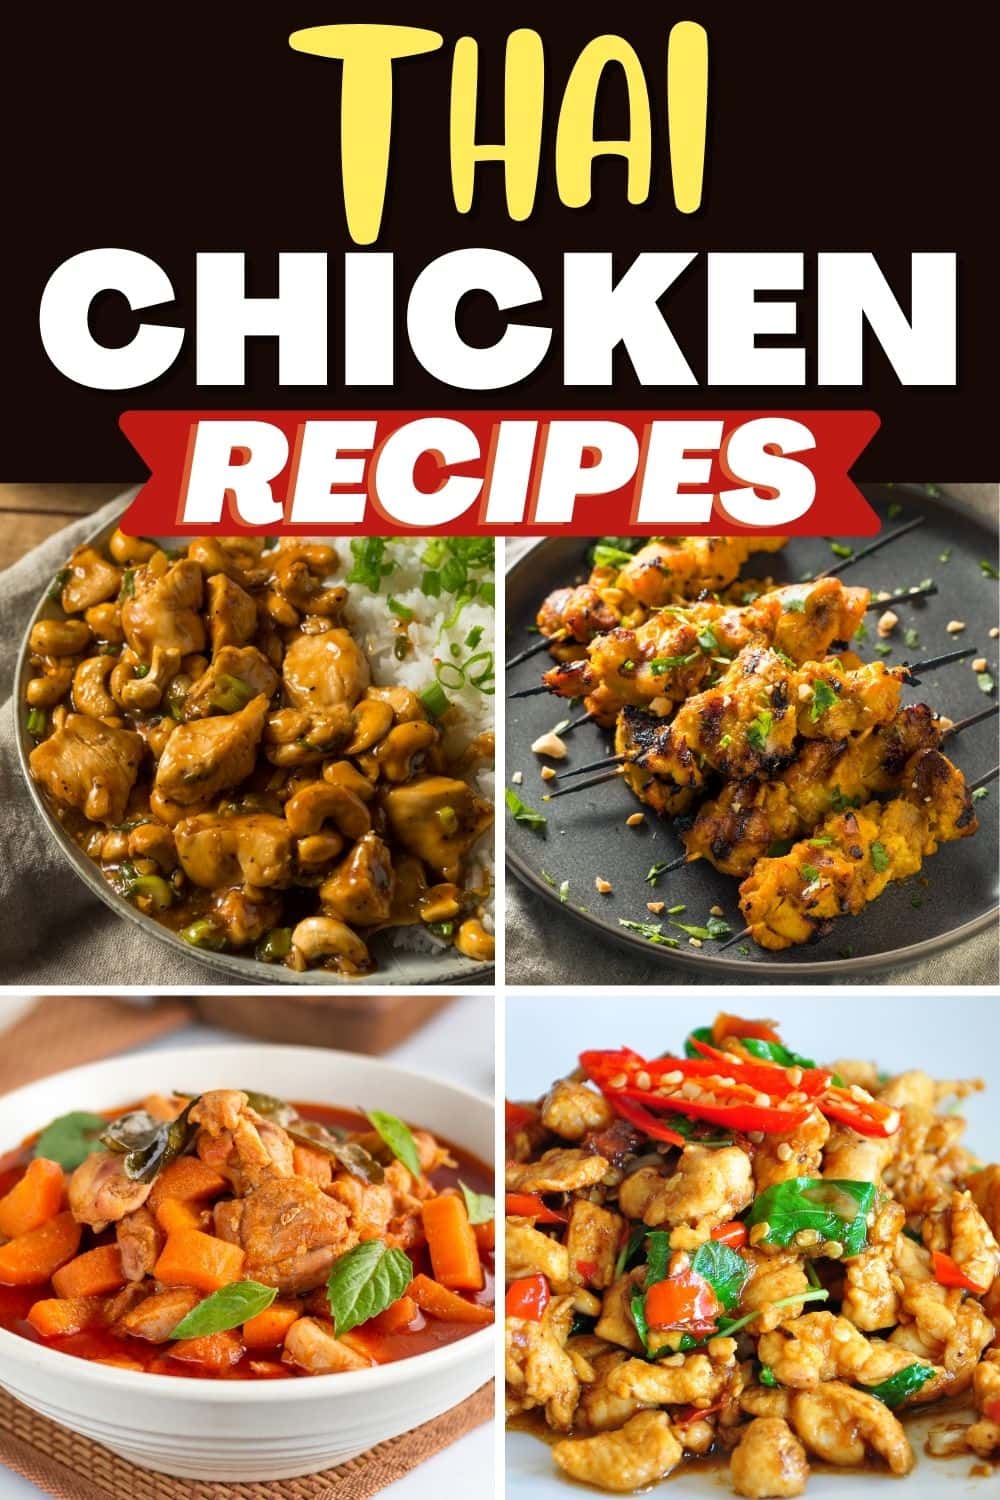 17 Easy Thai Chicken Recipes To Try at Home - Insanely Good